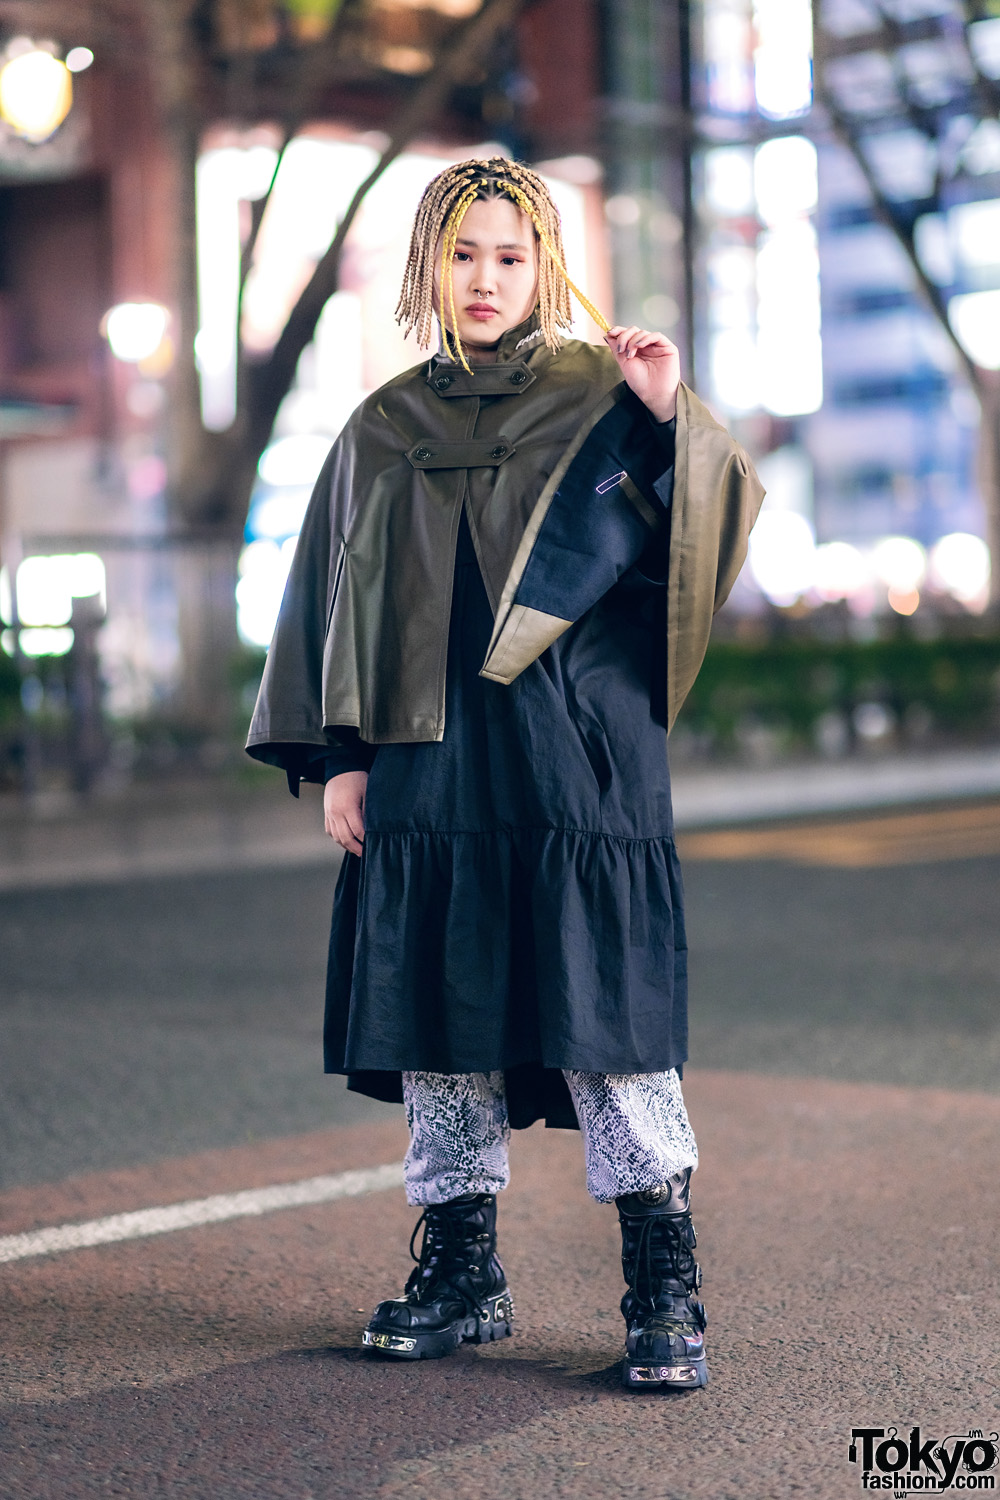 Tokyo Layered Street Style w/ Yellow Braids, Septum Ring, Growing Pains Faux Leather Cape, Tiered Dress, Kinsella Snakeskin Pants & New Rock Boots